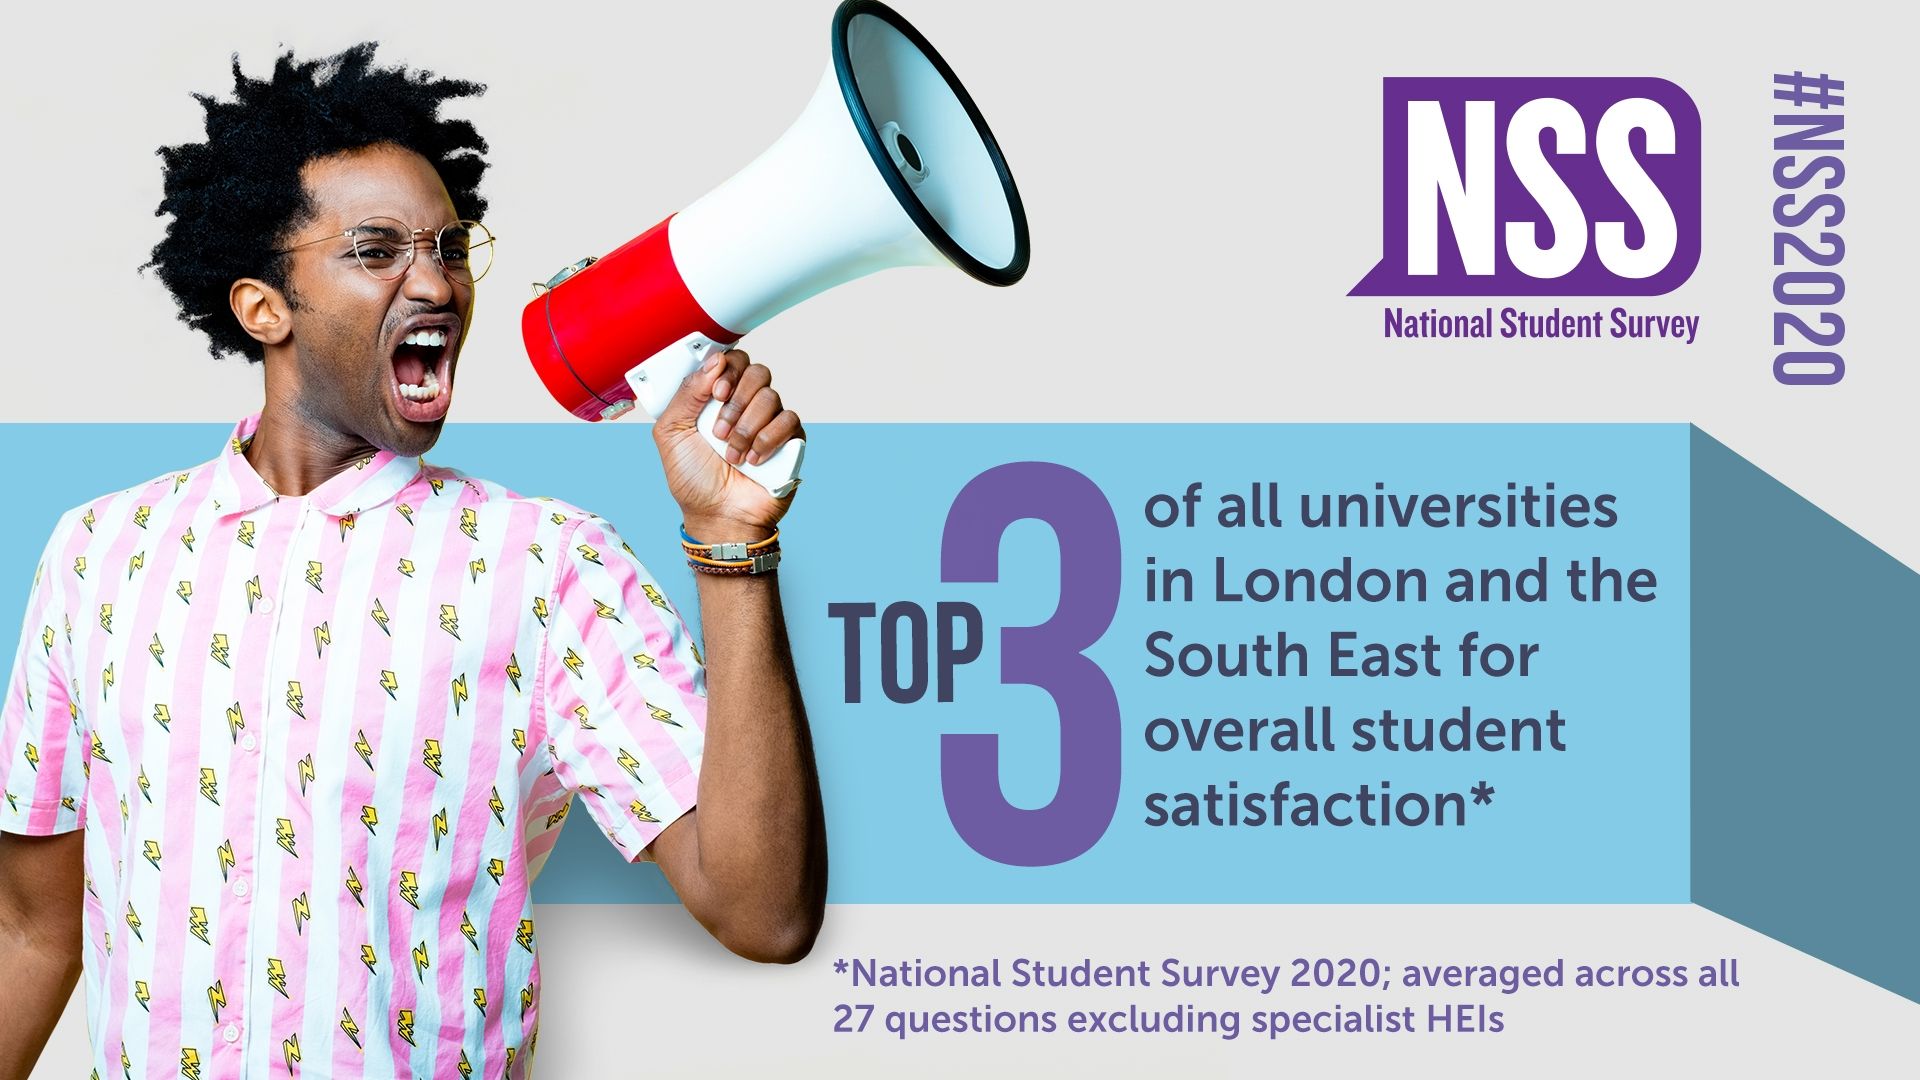 Top 3 of all universities in London and South East for overall student satisfaction